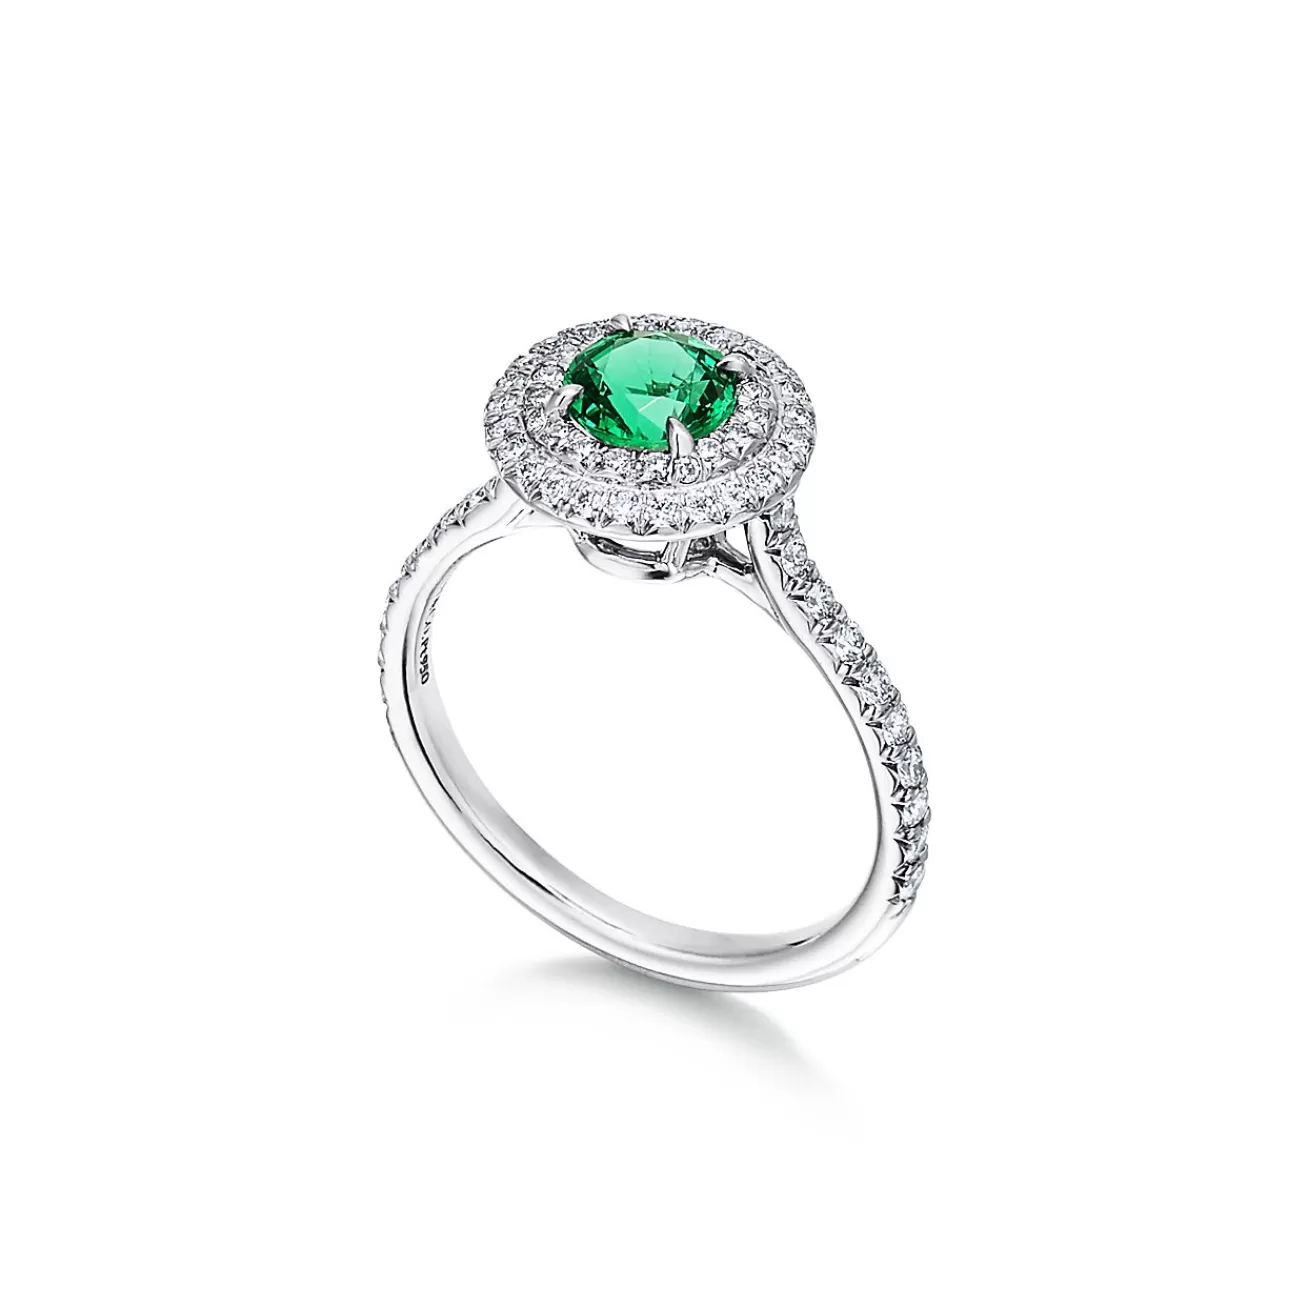 Tiffany & Co. Tiffany Soleste® ring in platinum with diamonds and an emerald. | ^ Rings | Platinum Jewelry